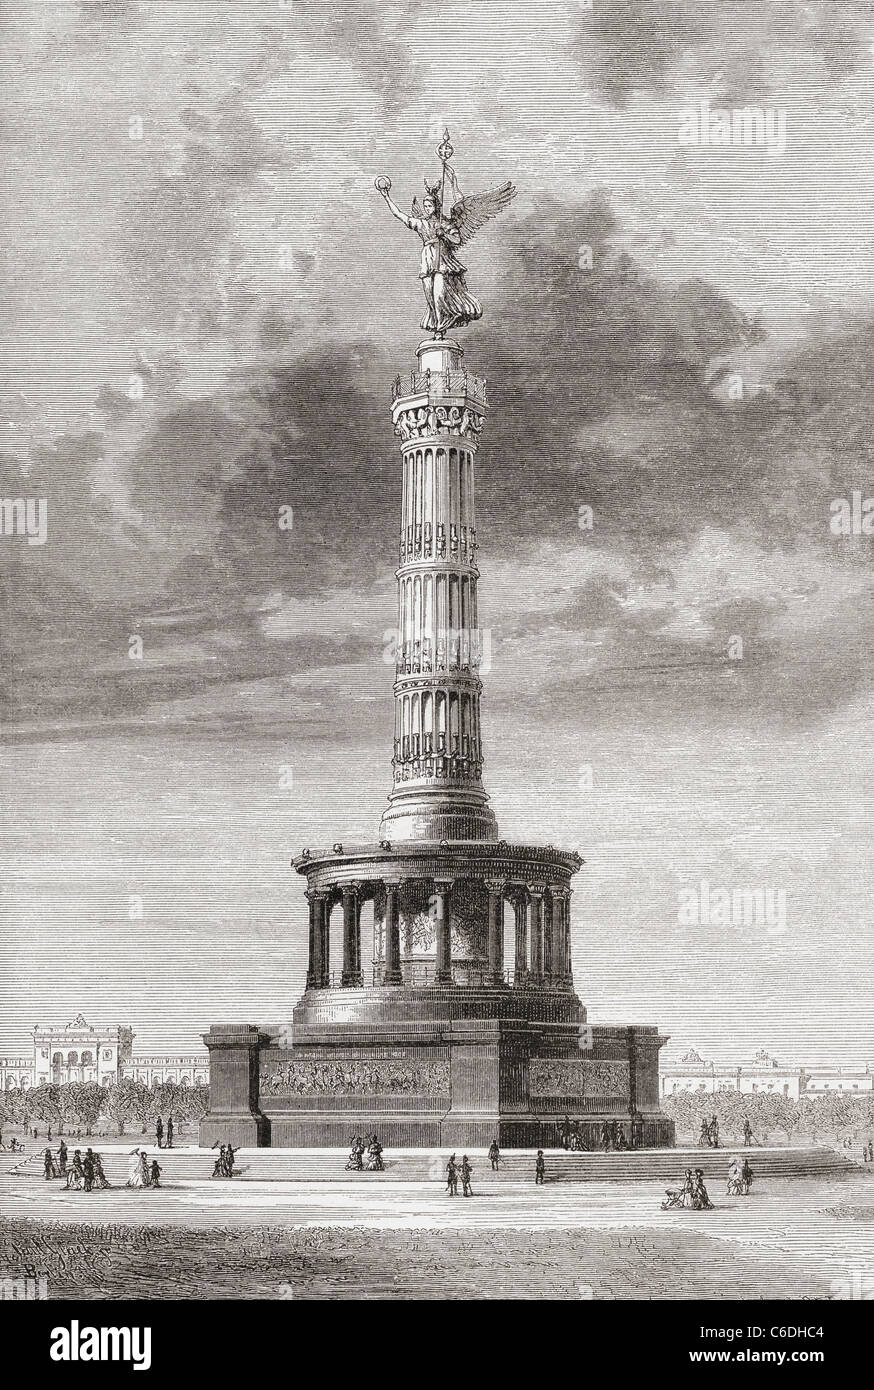 The Victory Column in the Tiergarten, Berlin, Germany in the 19th century. Stock Photo